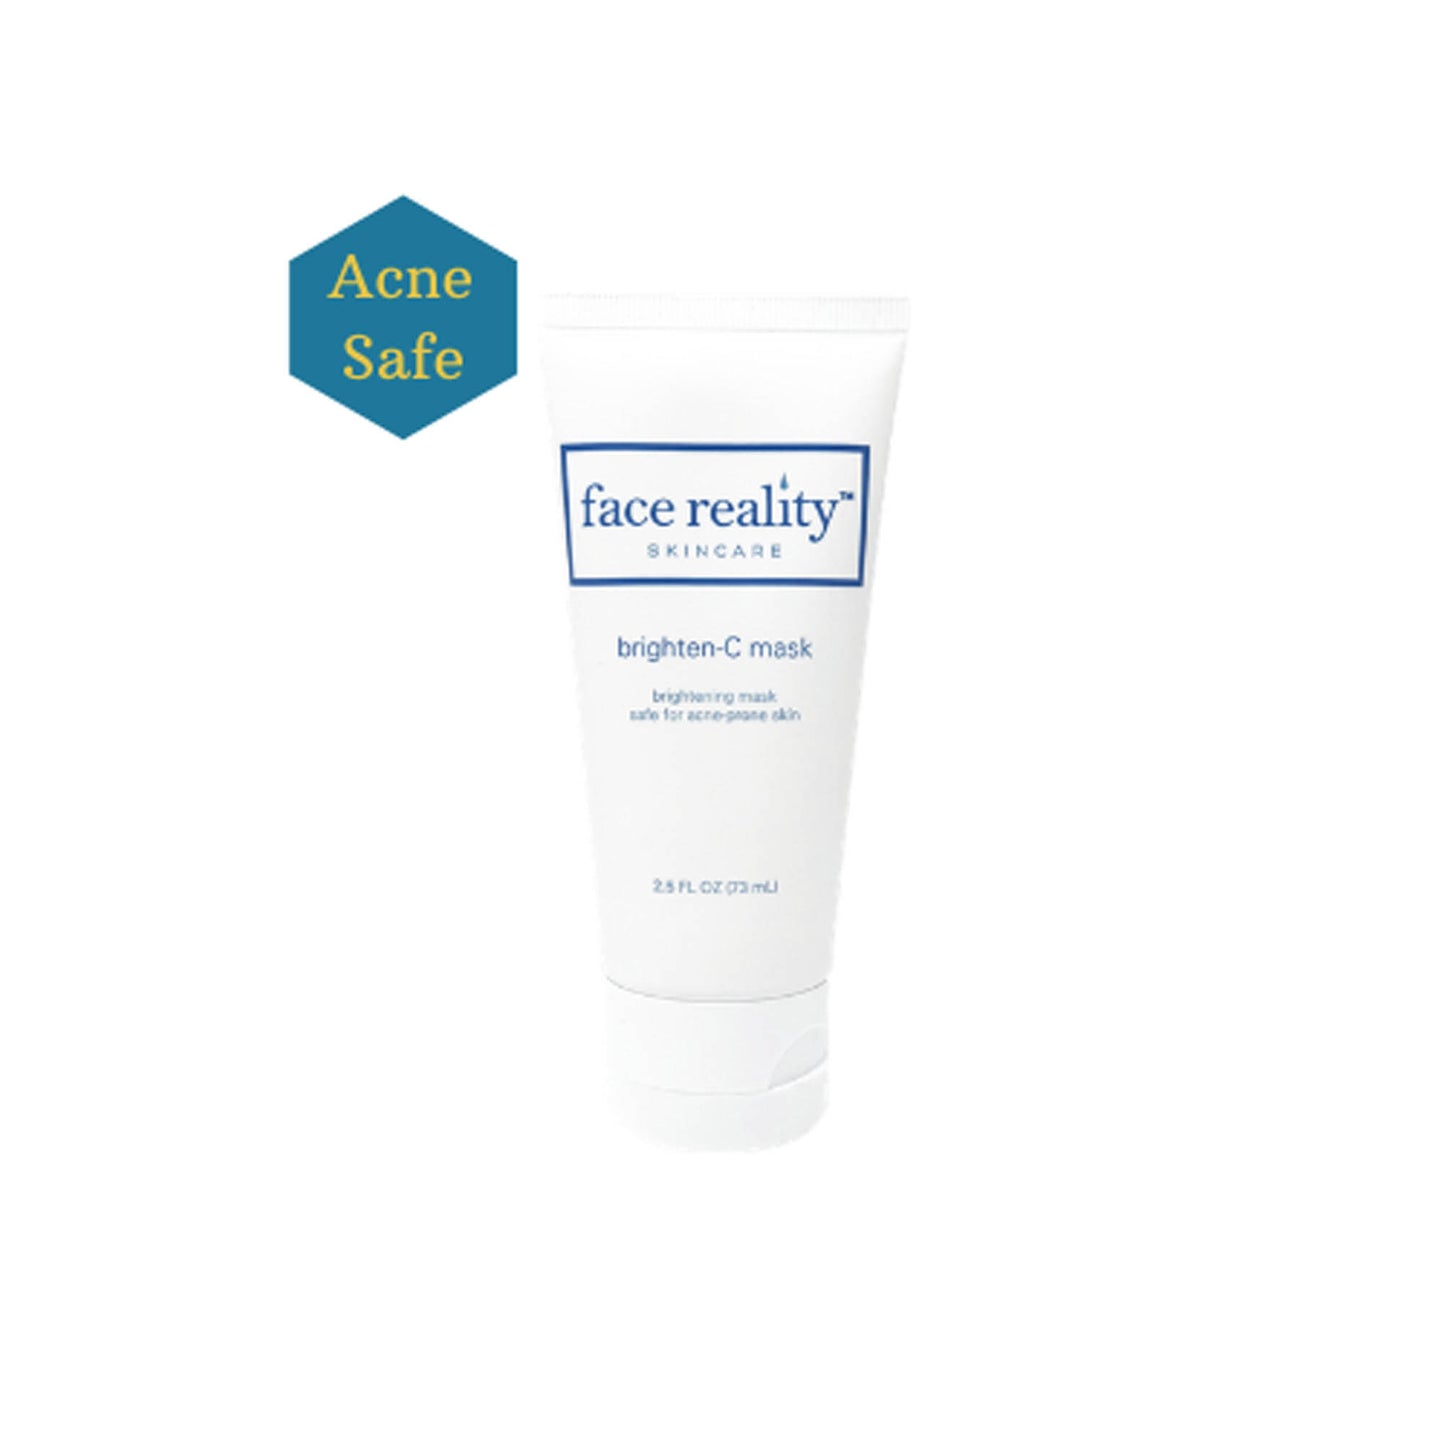 Face Reality Brightening-C mask